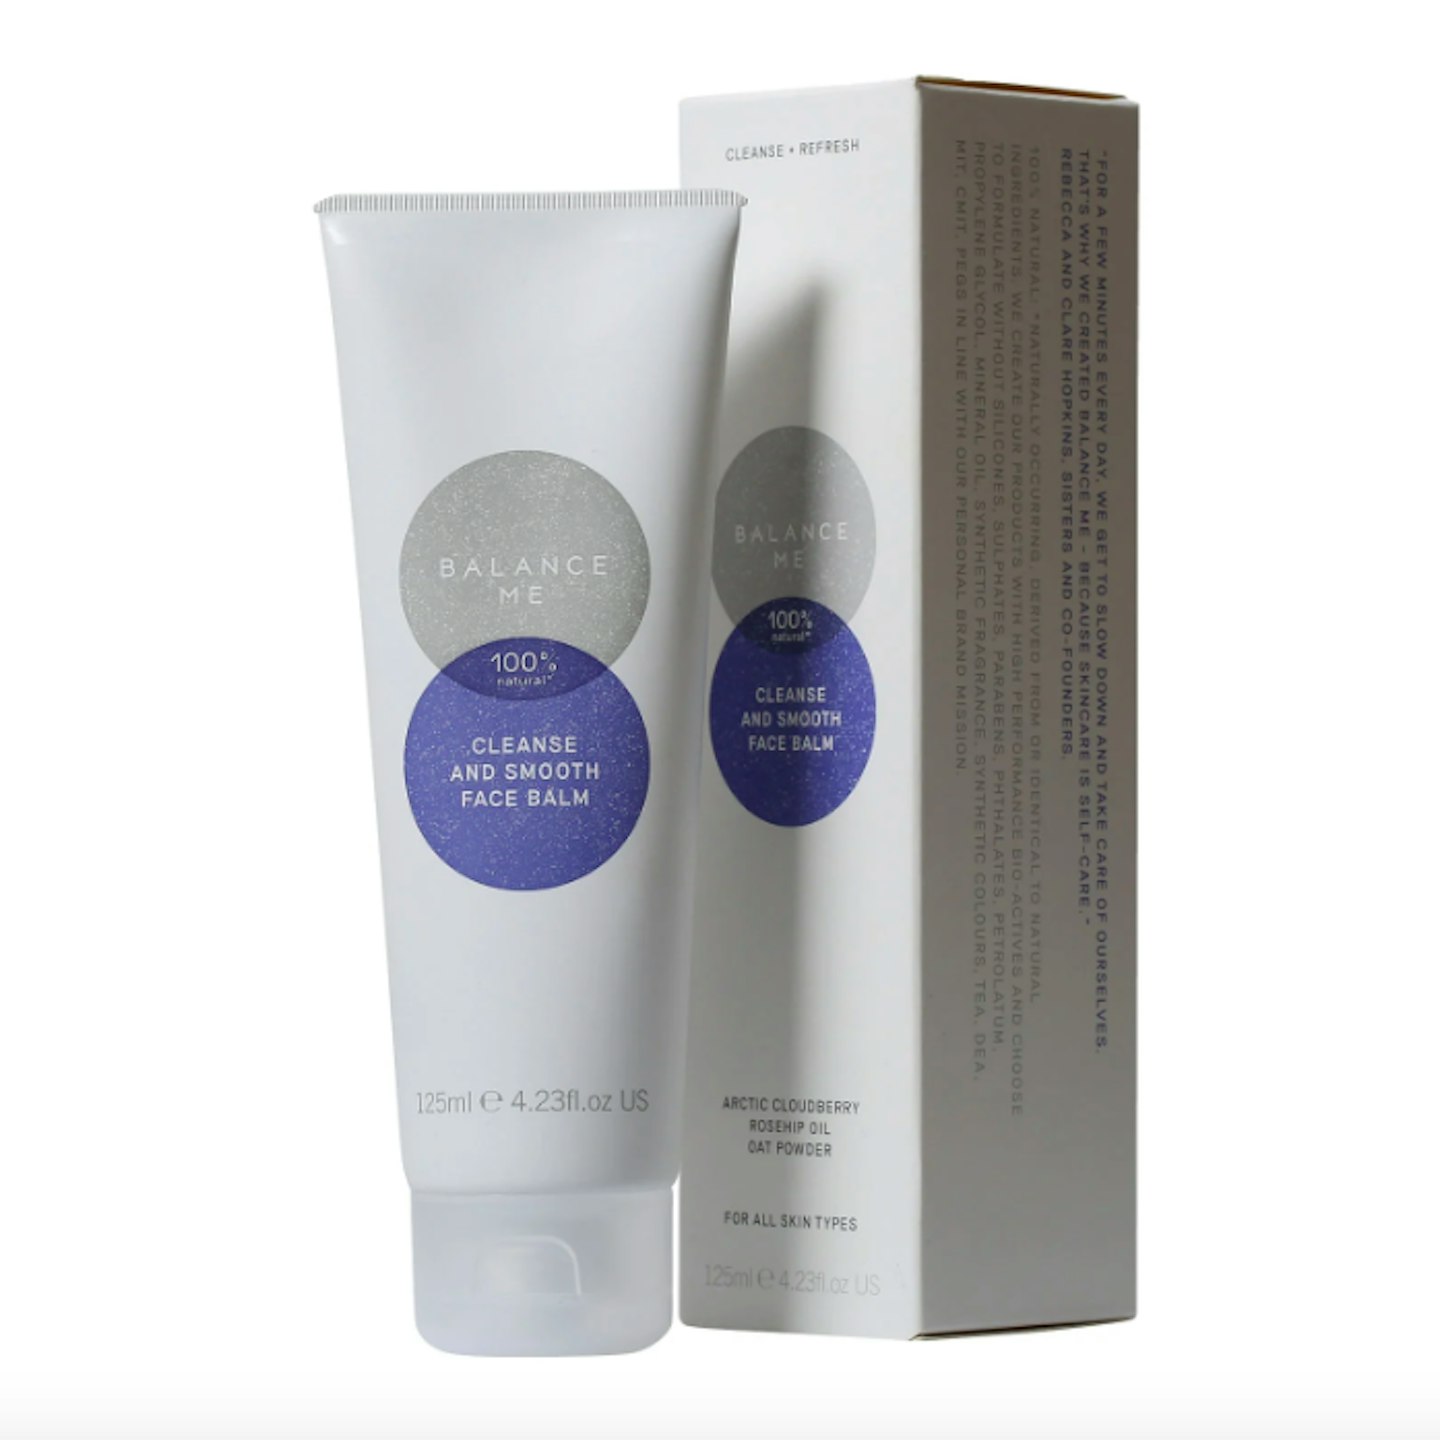 Balance Me, Cleanse and Smooth Face Balm, £24